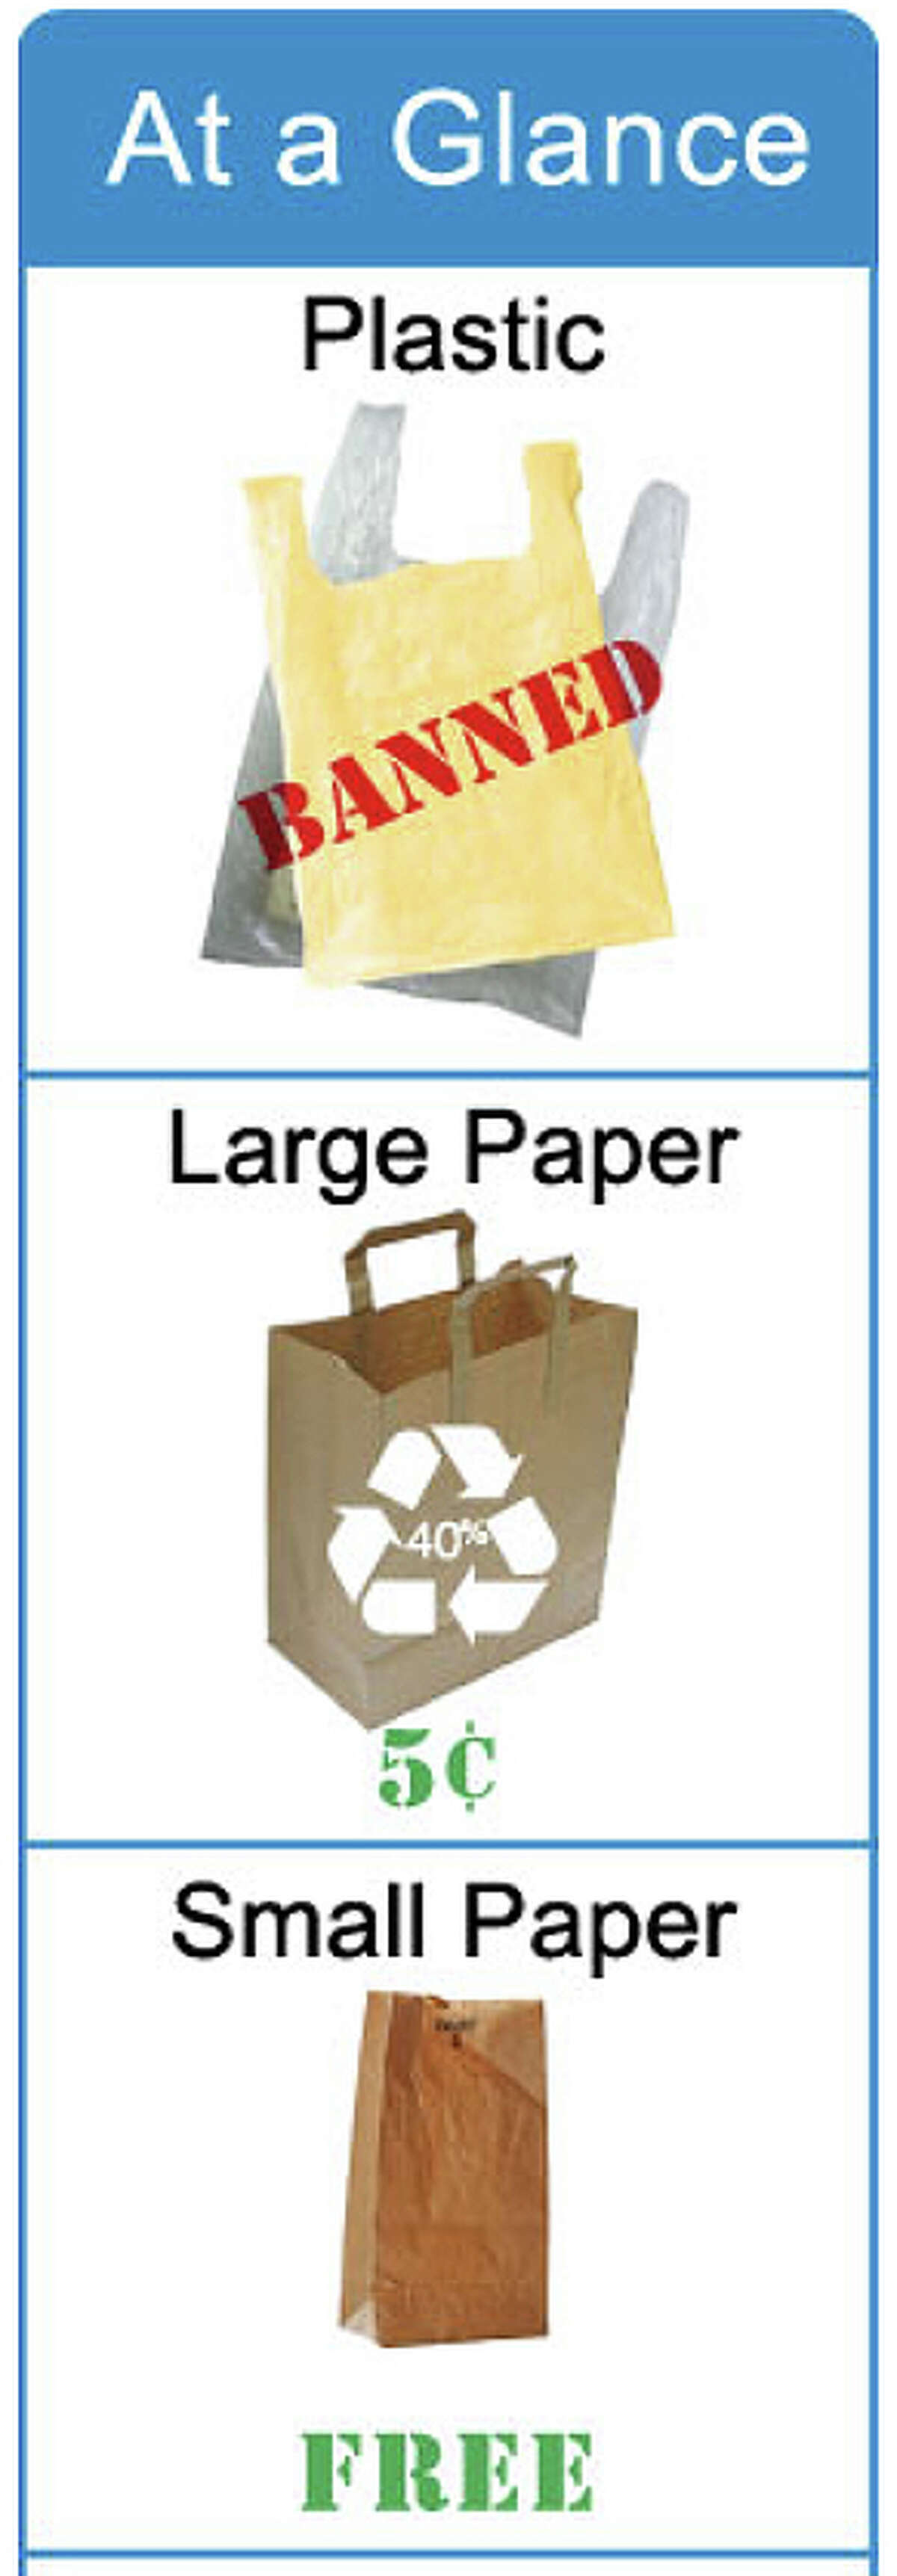 A reminder on the City of Seattle website about the types of bags that are prohibited by law here.